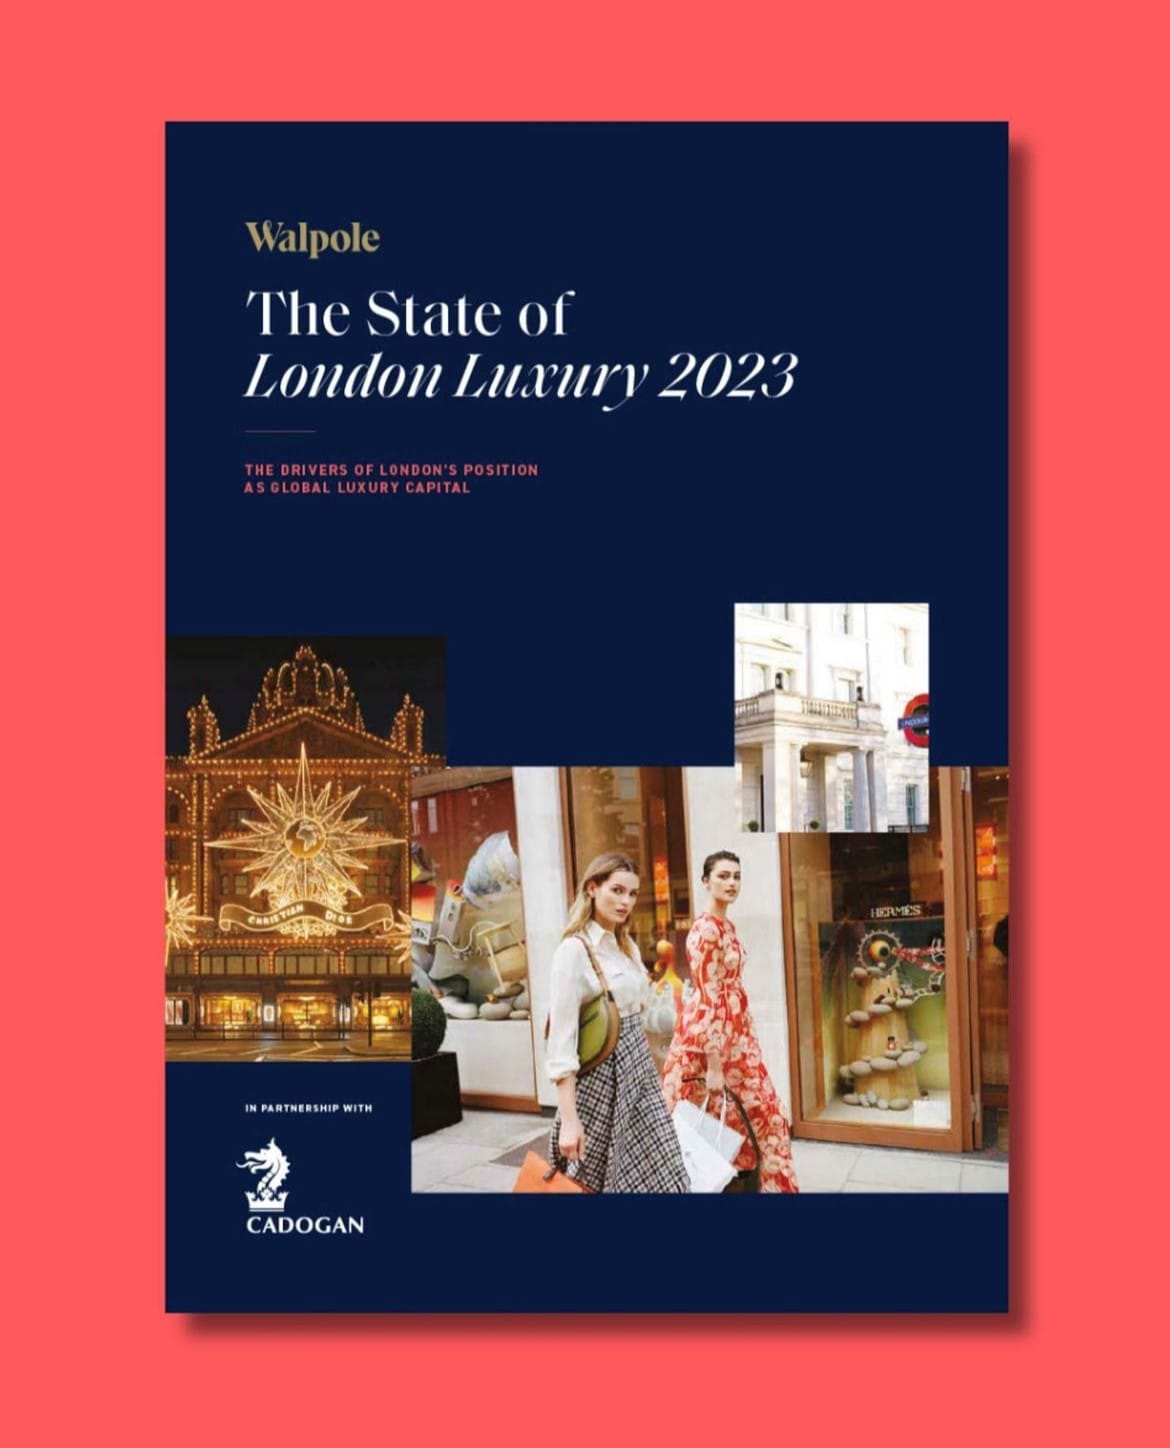 Walpole Publishes First State of London Luxury Report in Partnership With Cadogan